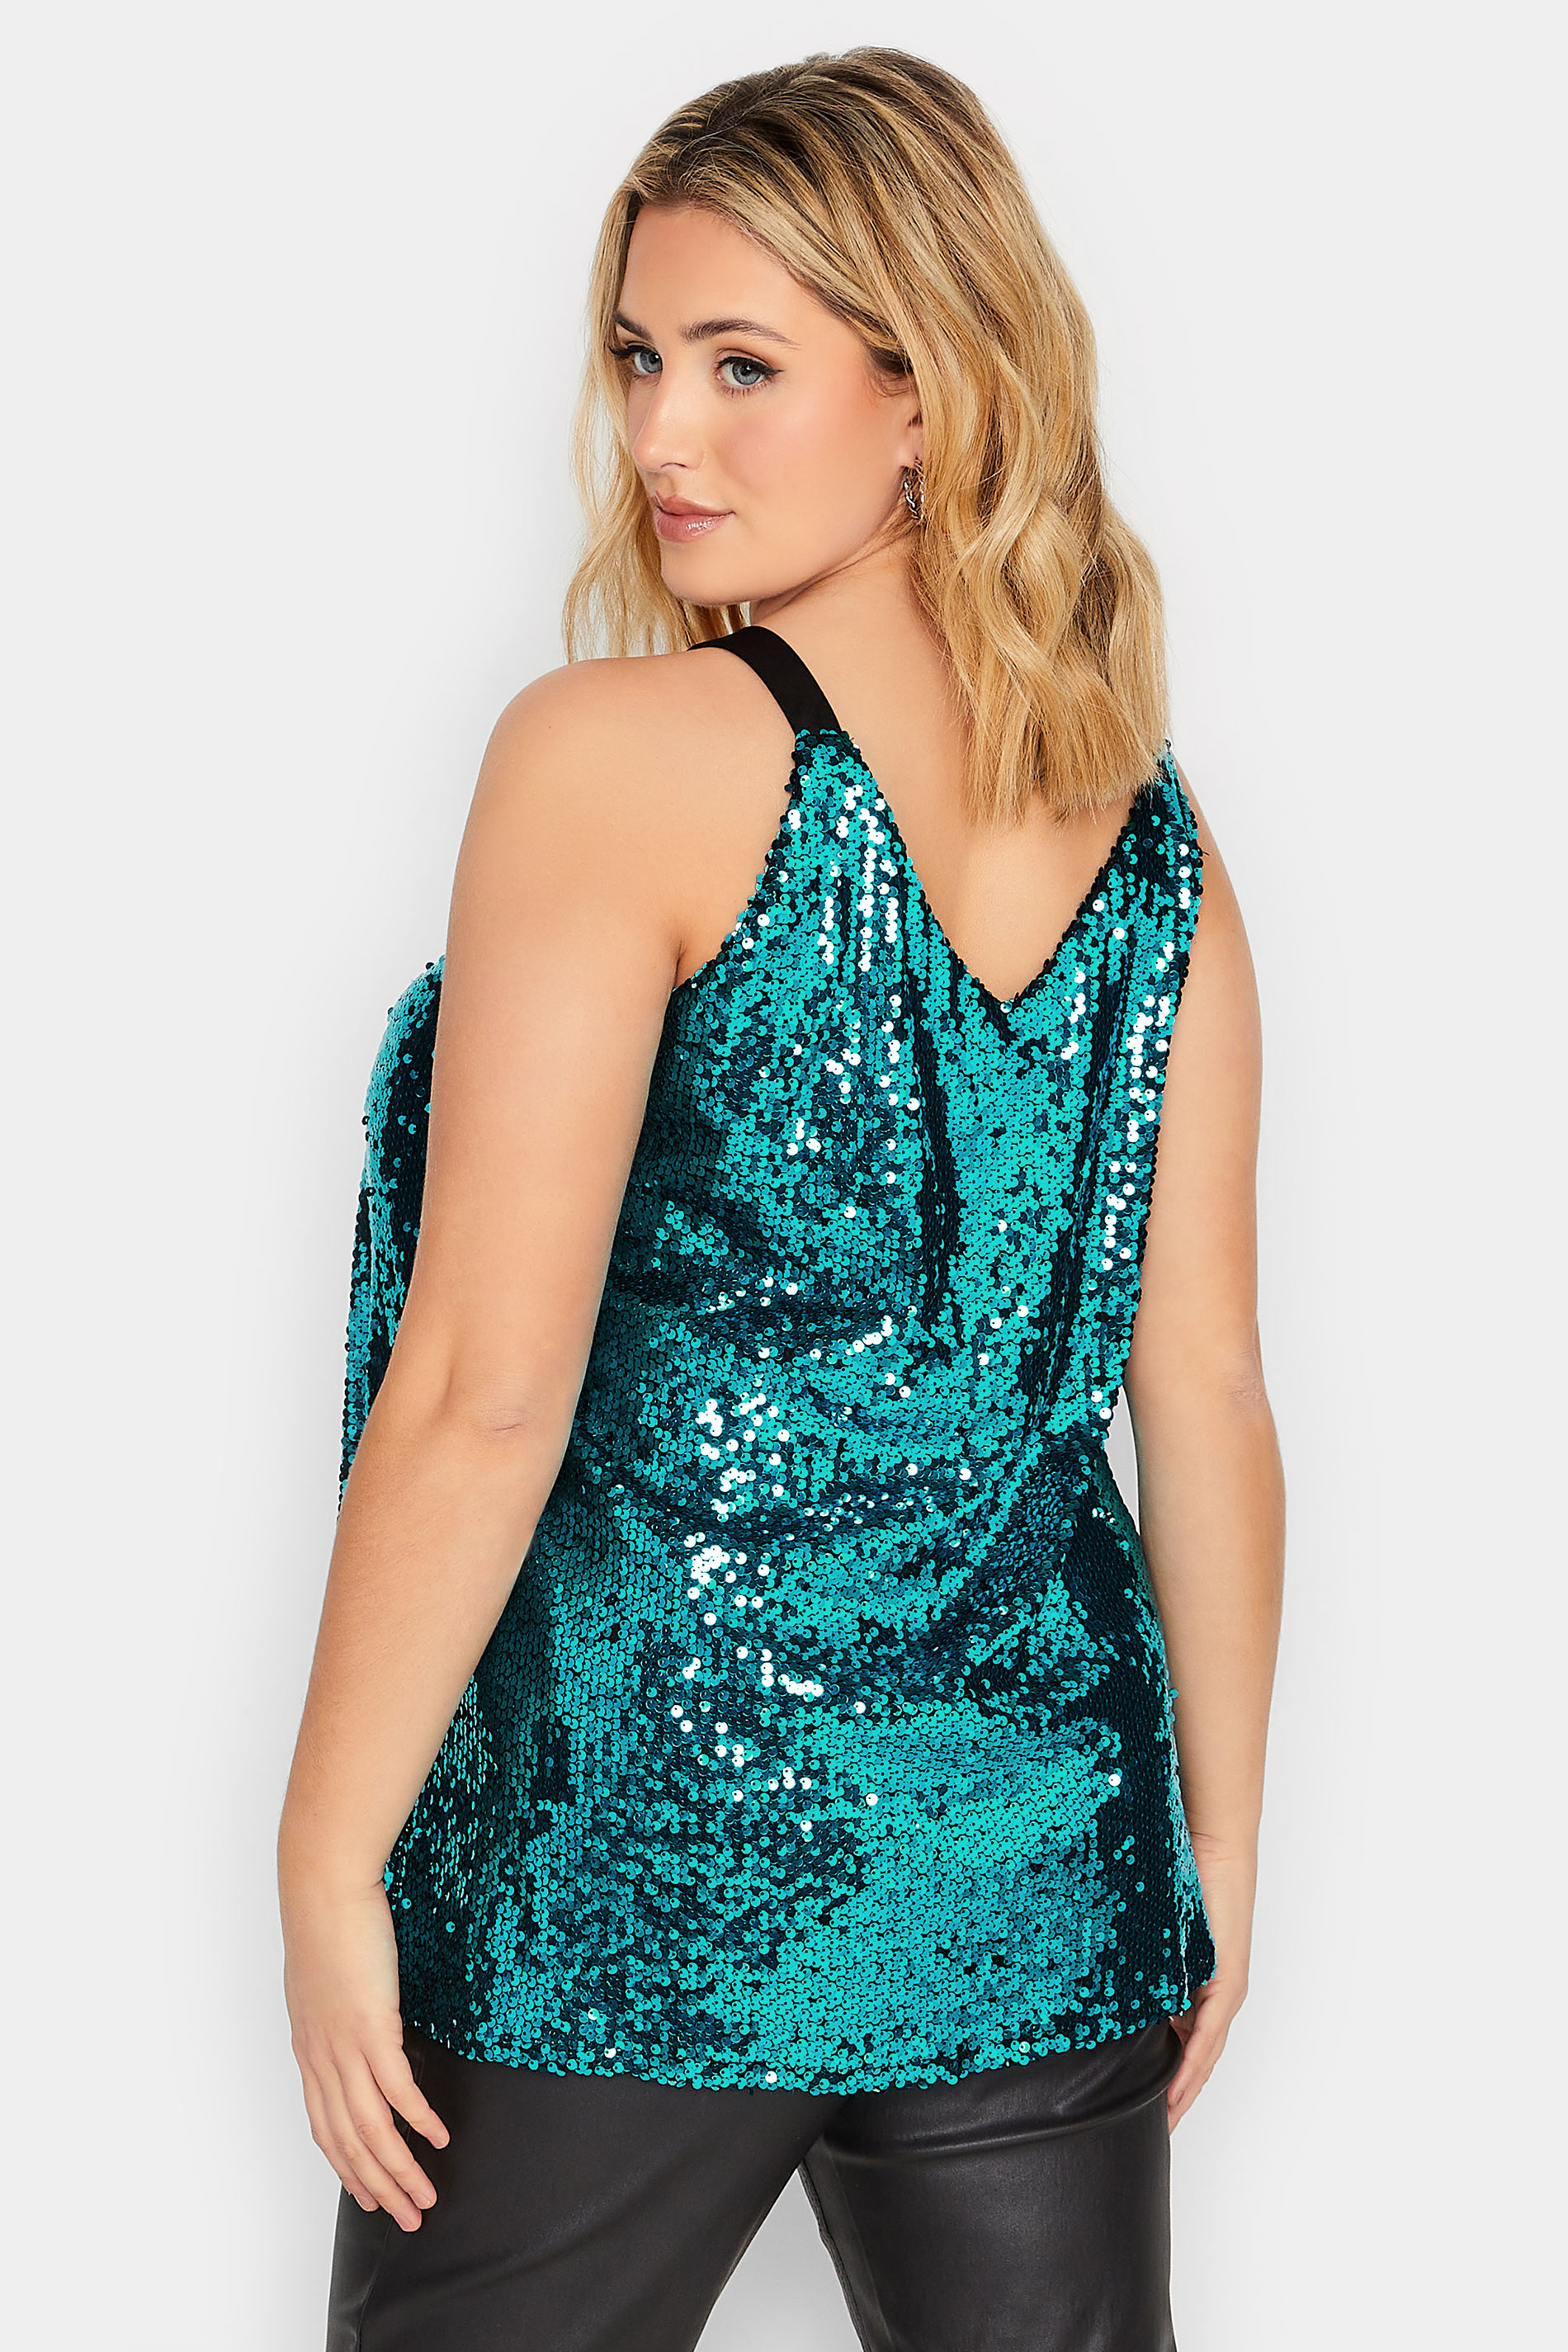 YOURS LONDON Plus Size Teal Blue Sequin Embellished Cami Top | Yours Clothing 3